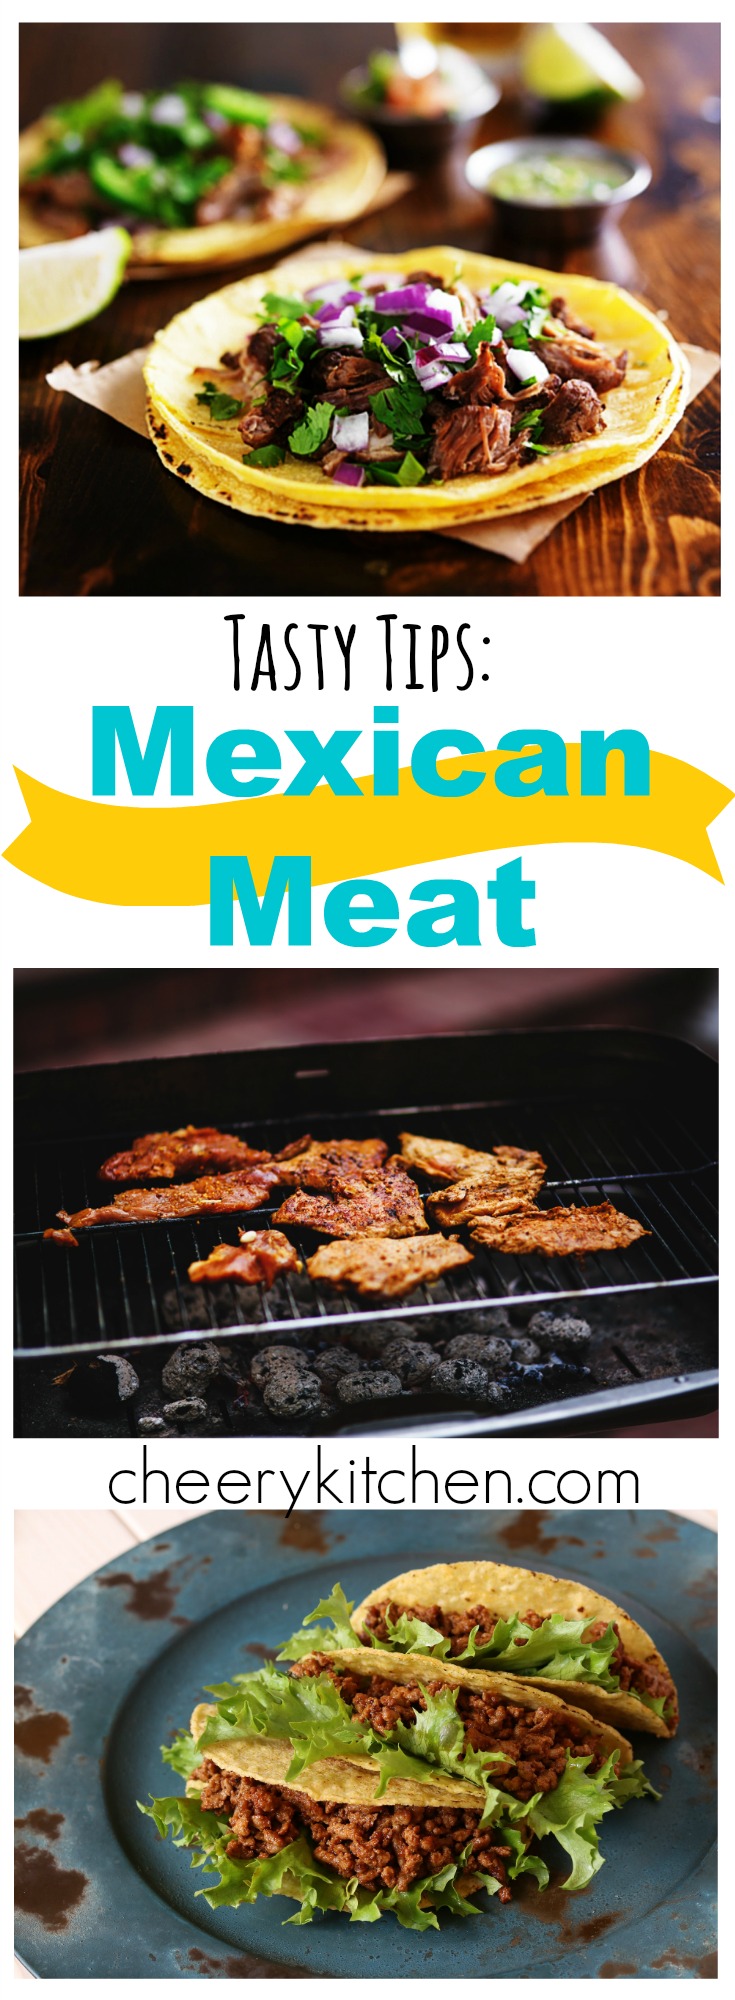 Mexican-Meat-8-jpg - Cheery Kitchen